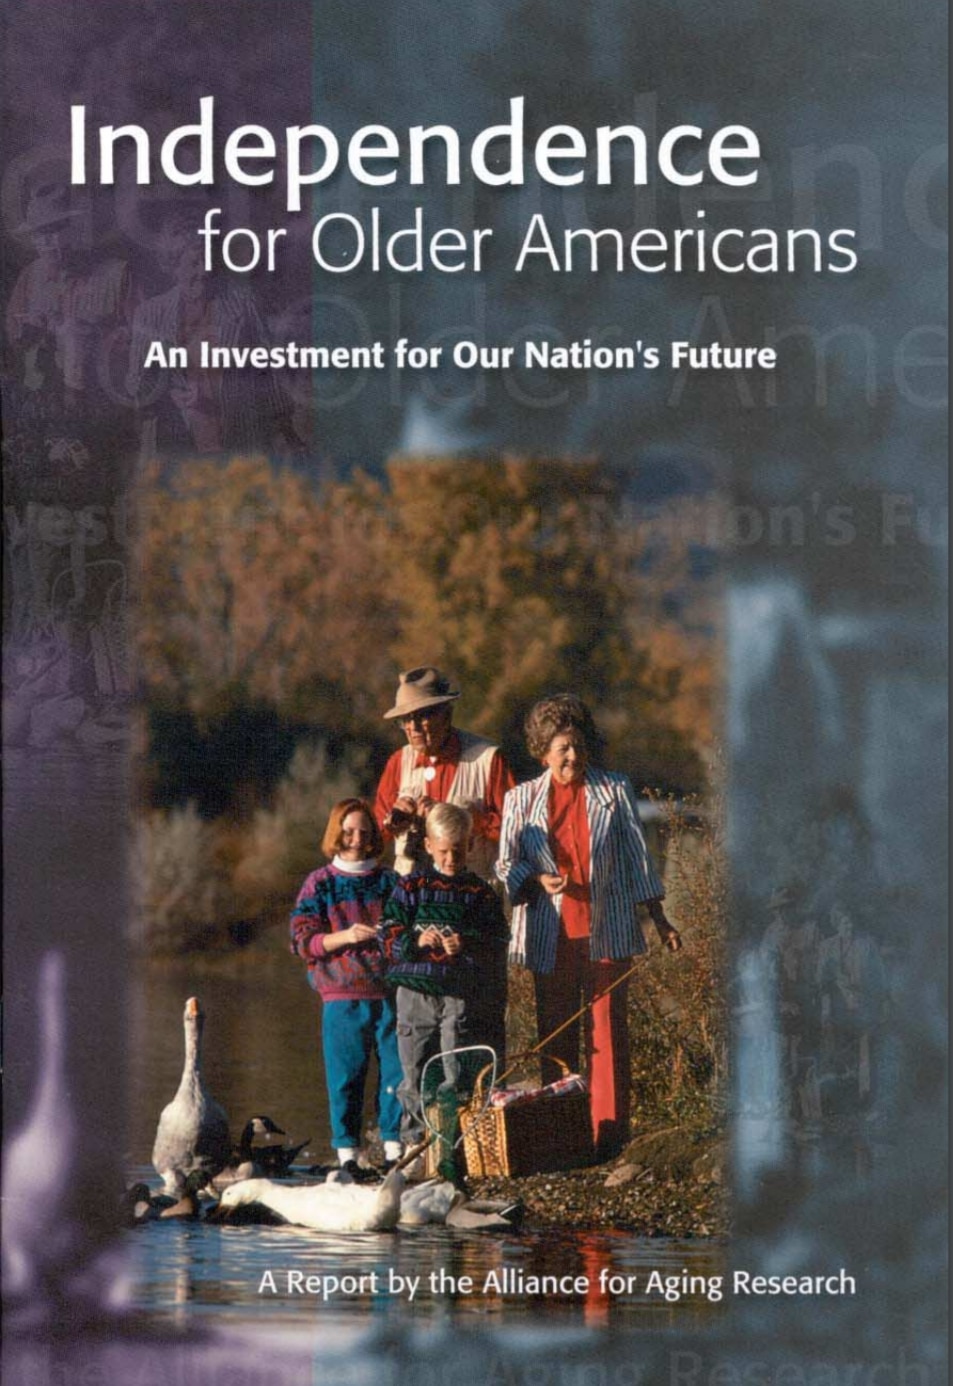 "Independence for Older Americans" report cover.